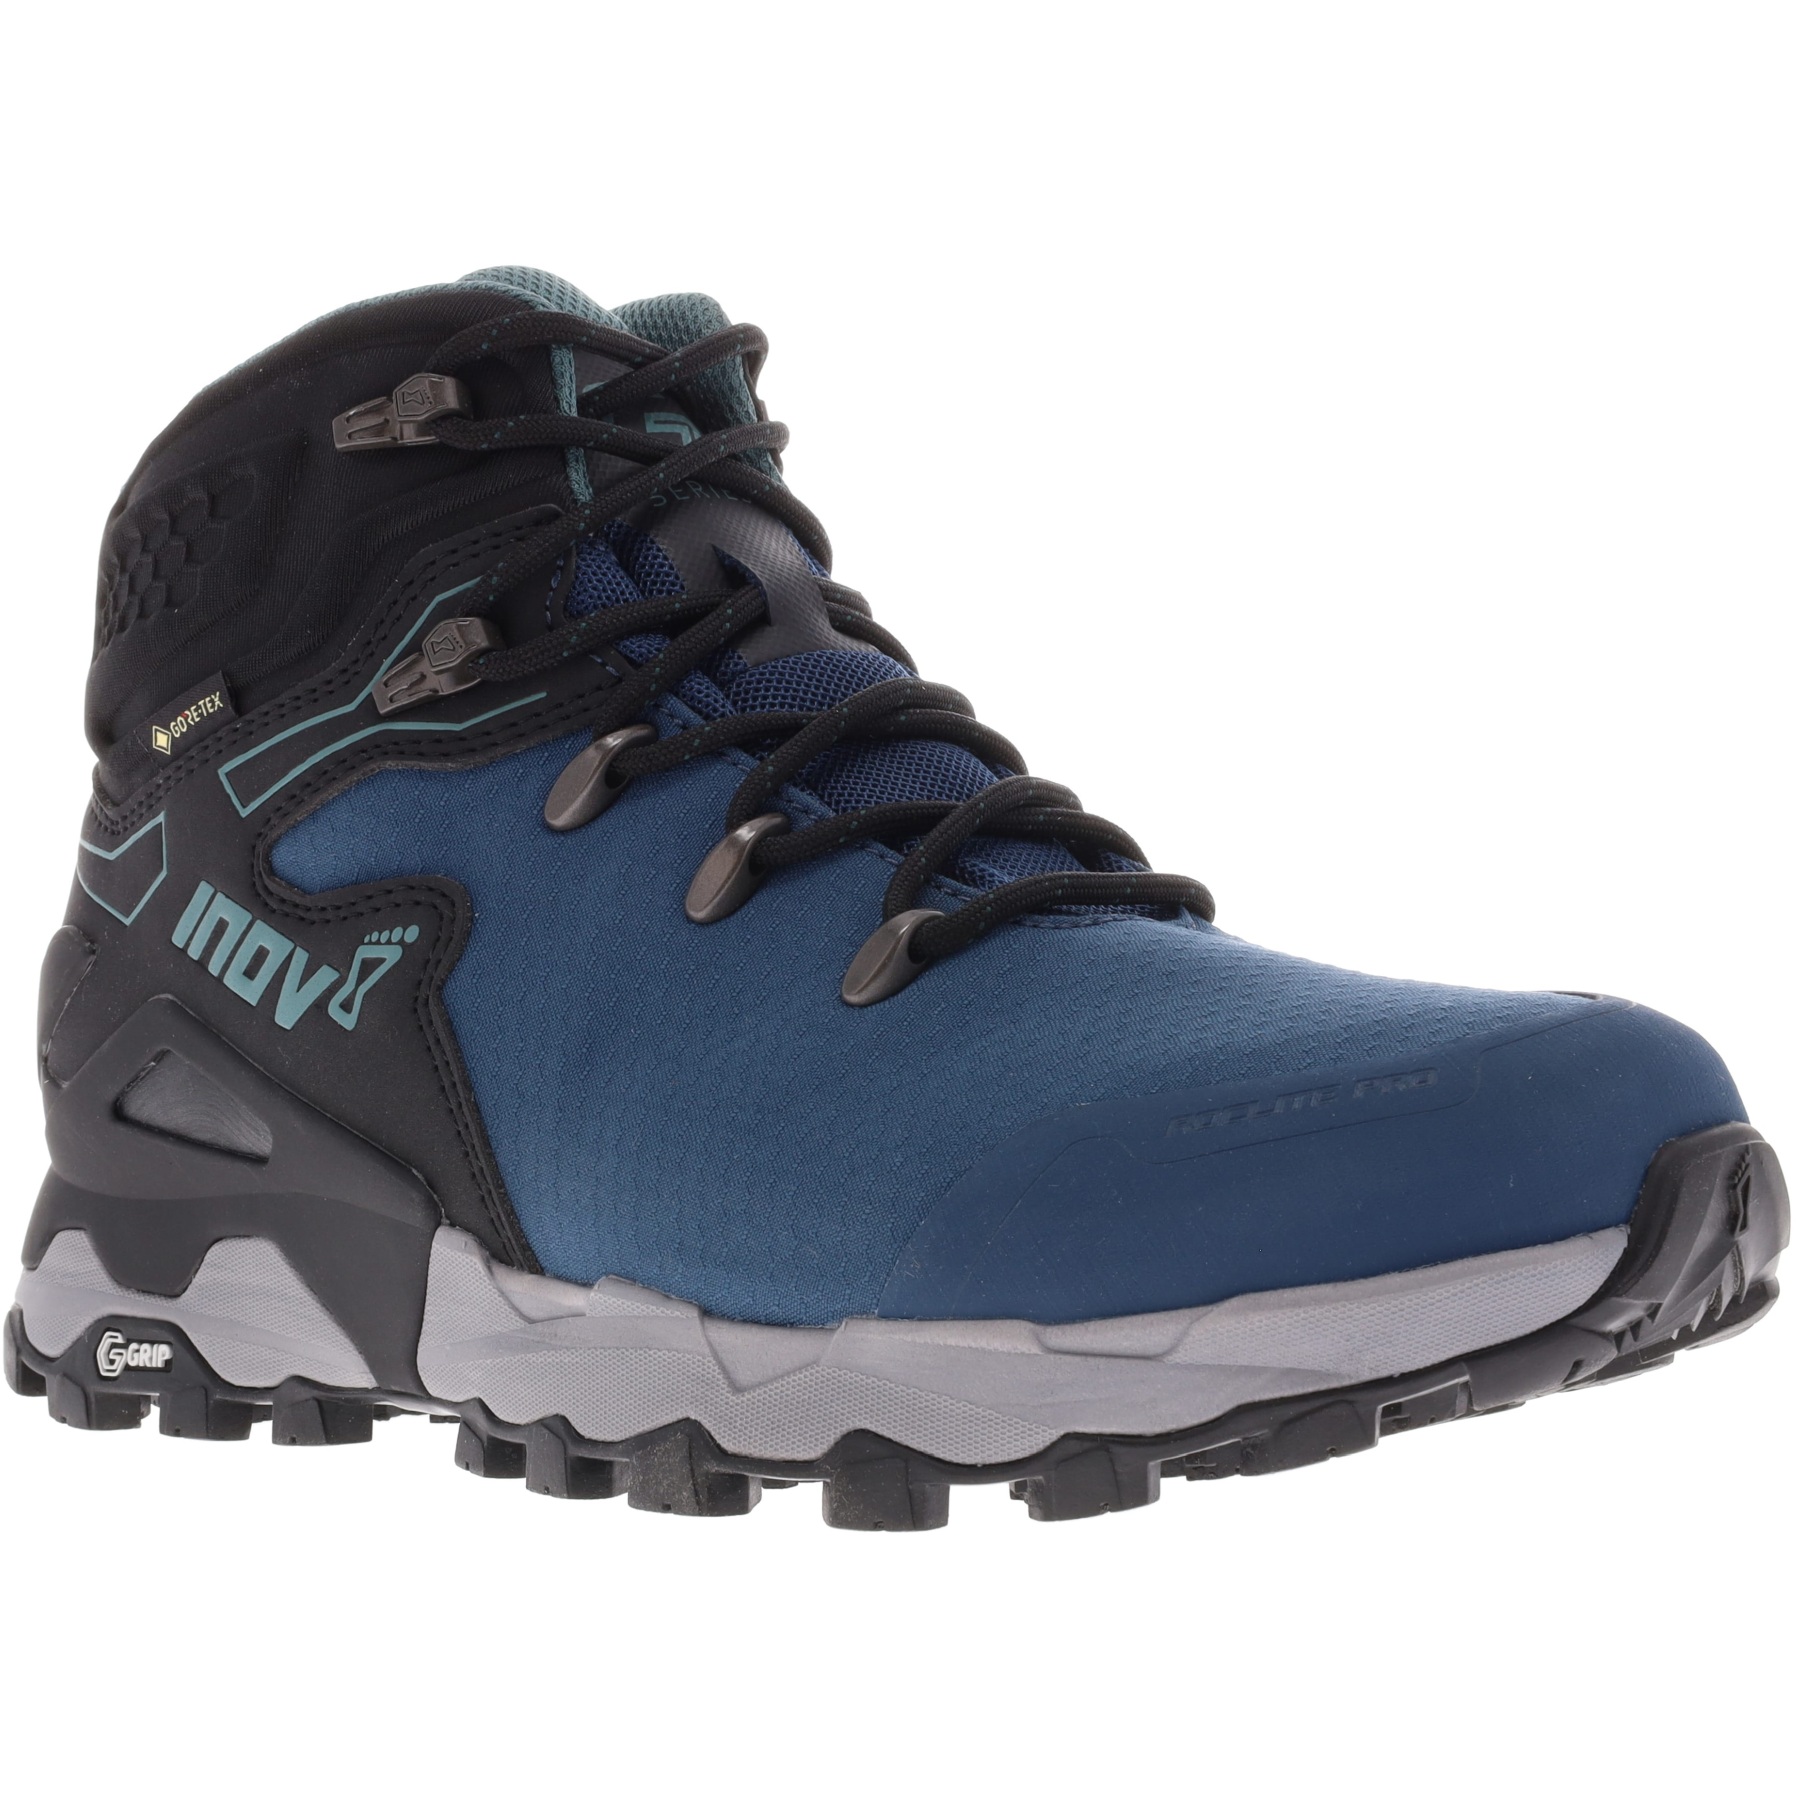 Picture of Inov-8 Roclite Pro G 400 GTX V2 Wide Women&#039;s Hiking Shoes - navy/black/blue